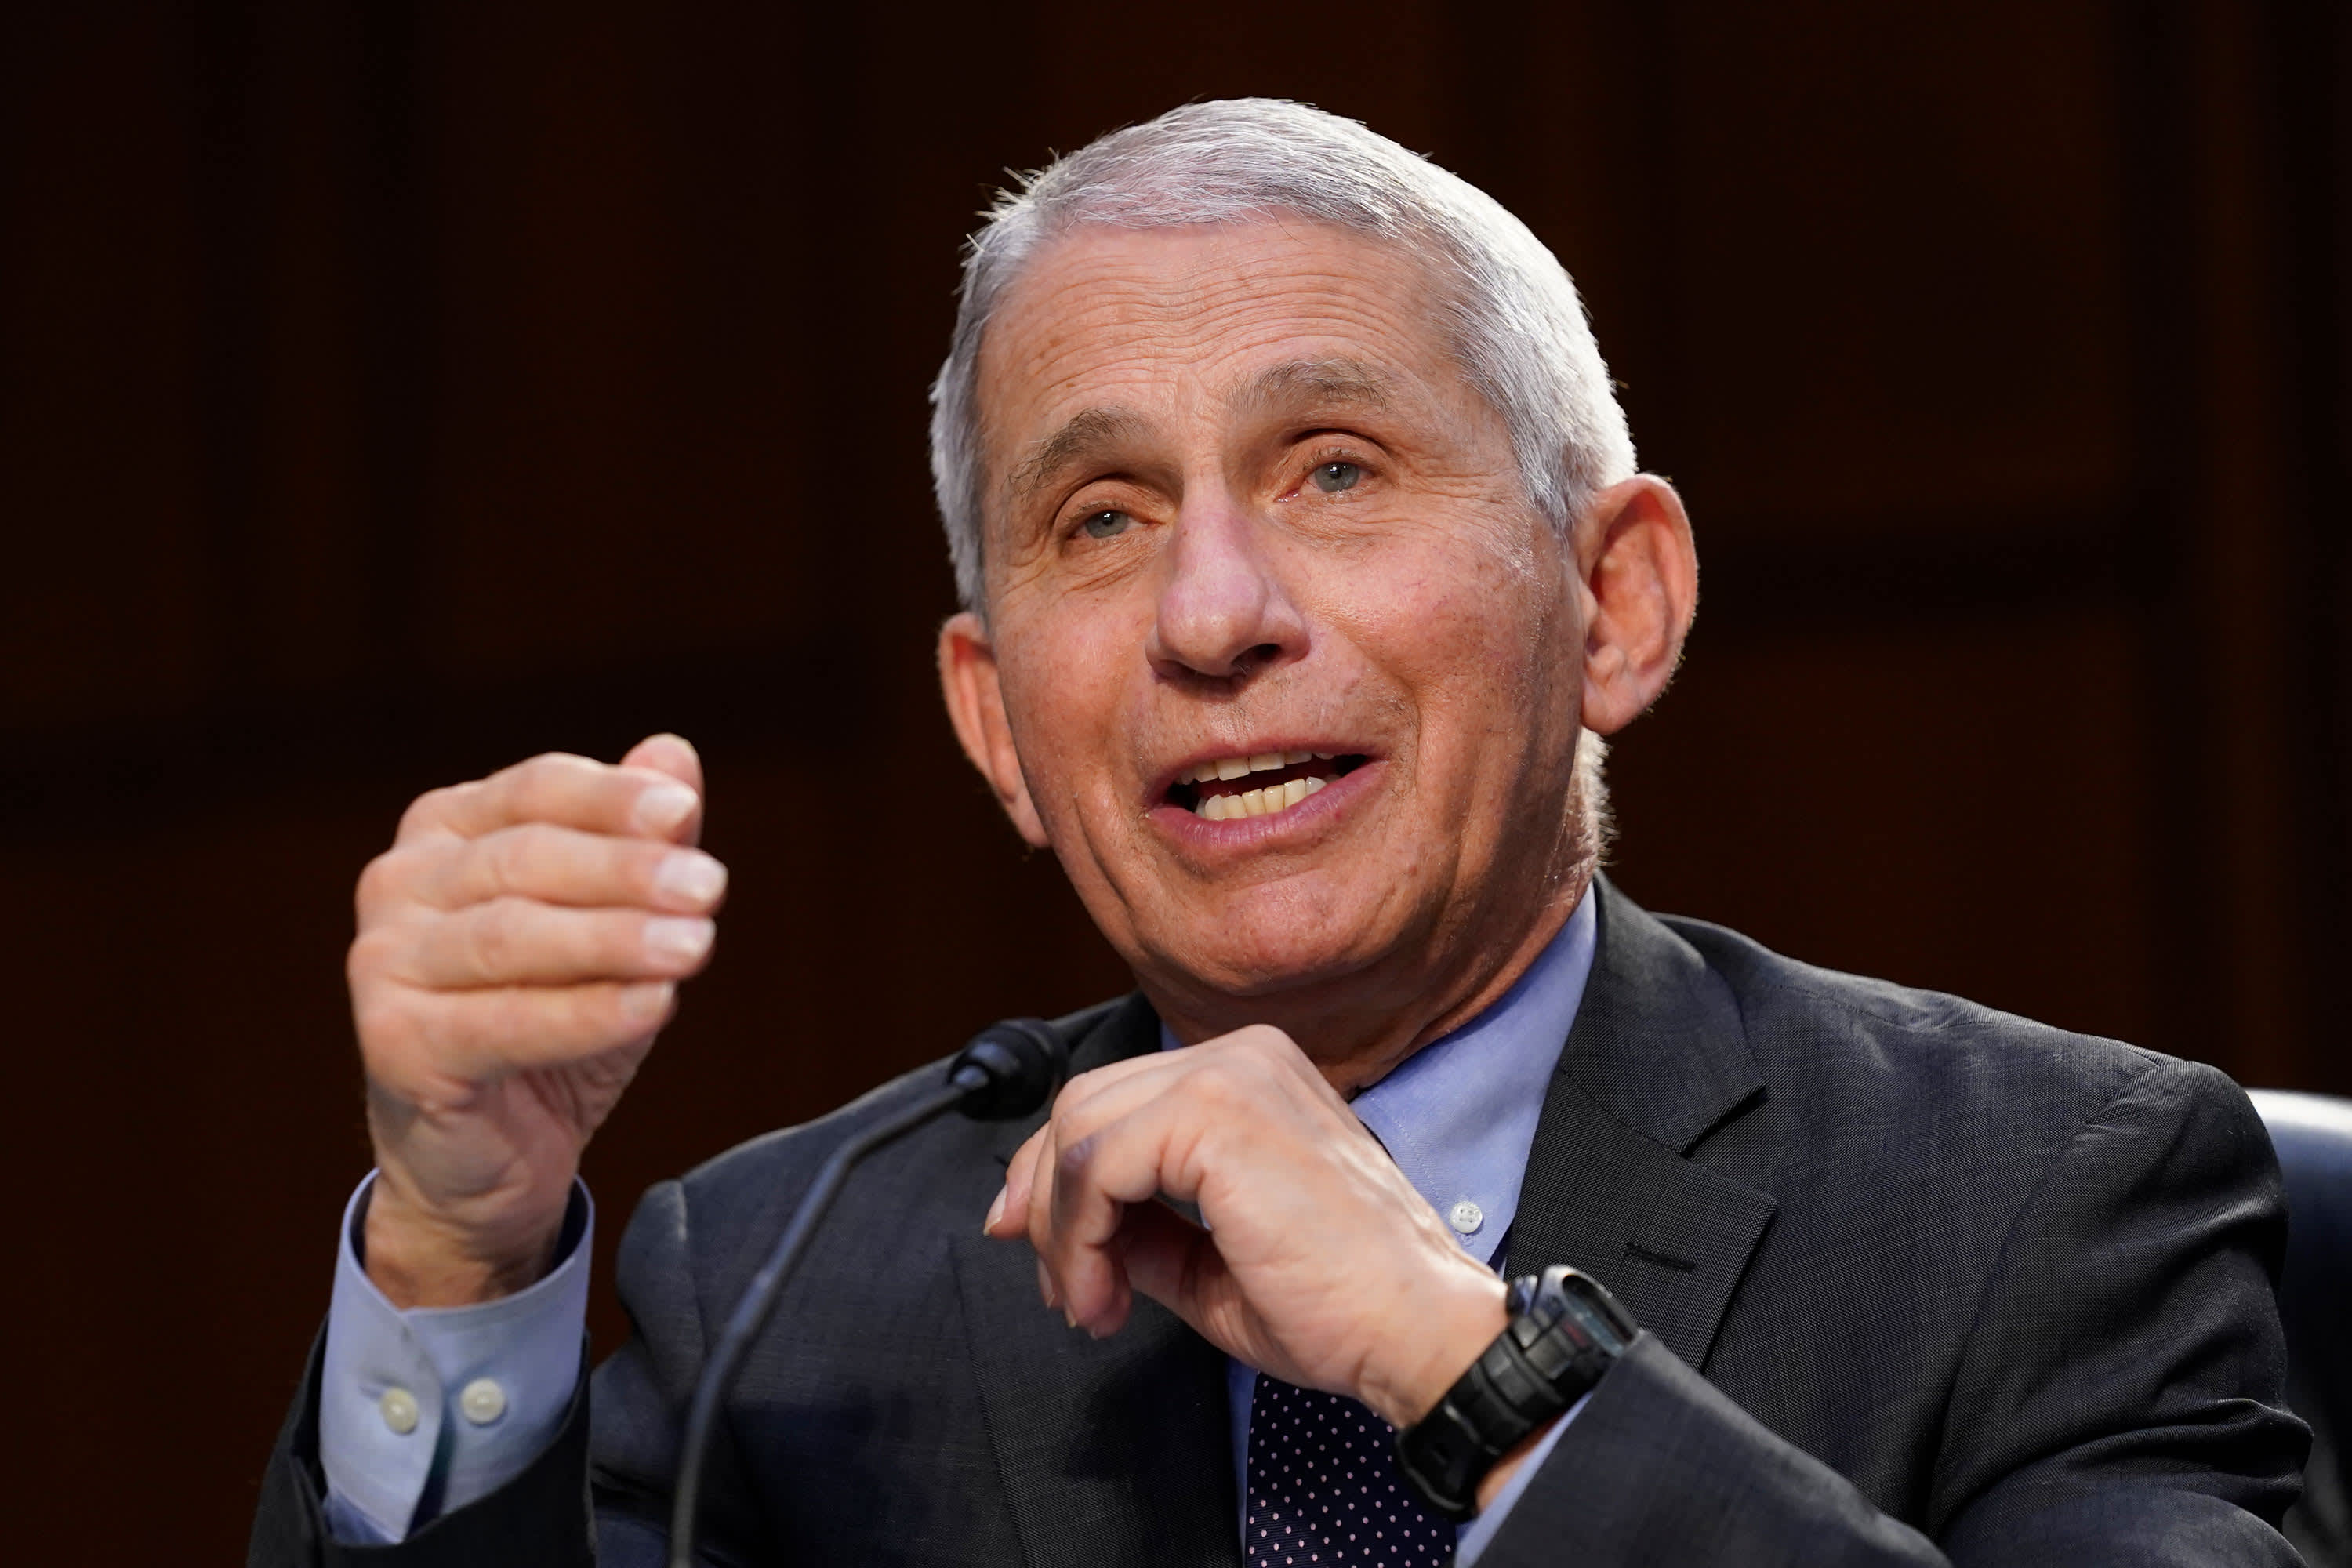 'I totally disagree with you,' Fauci tells GOP senator in fiery exchange over masks